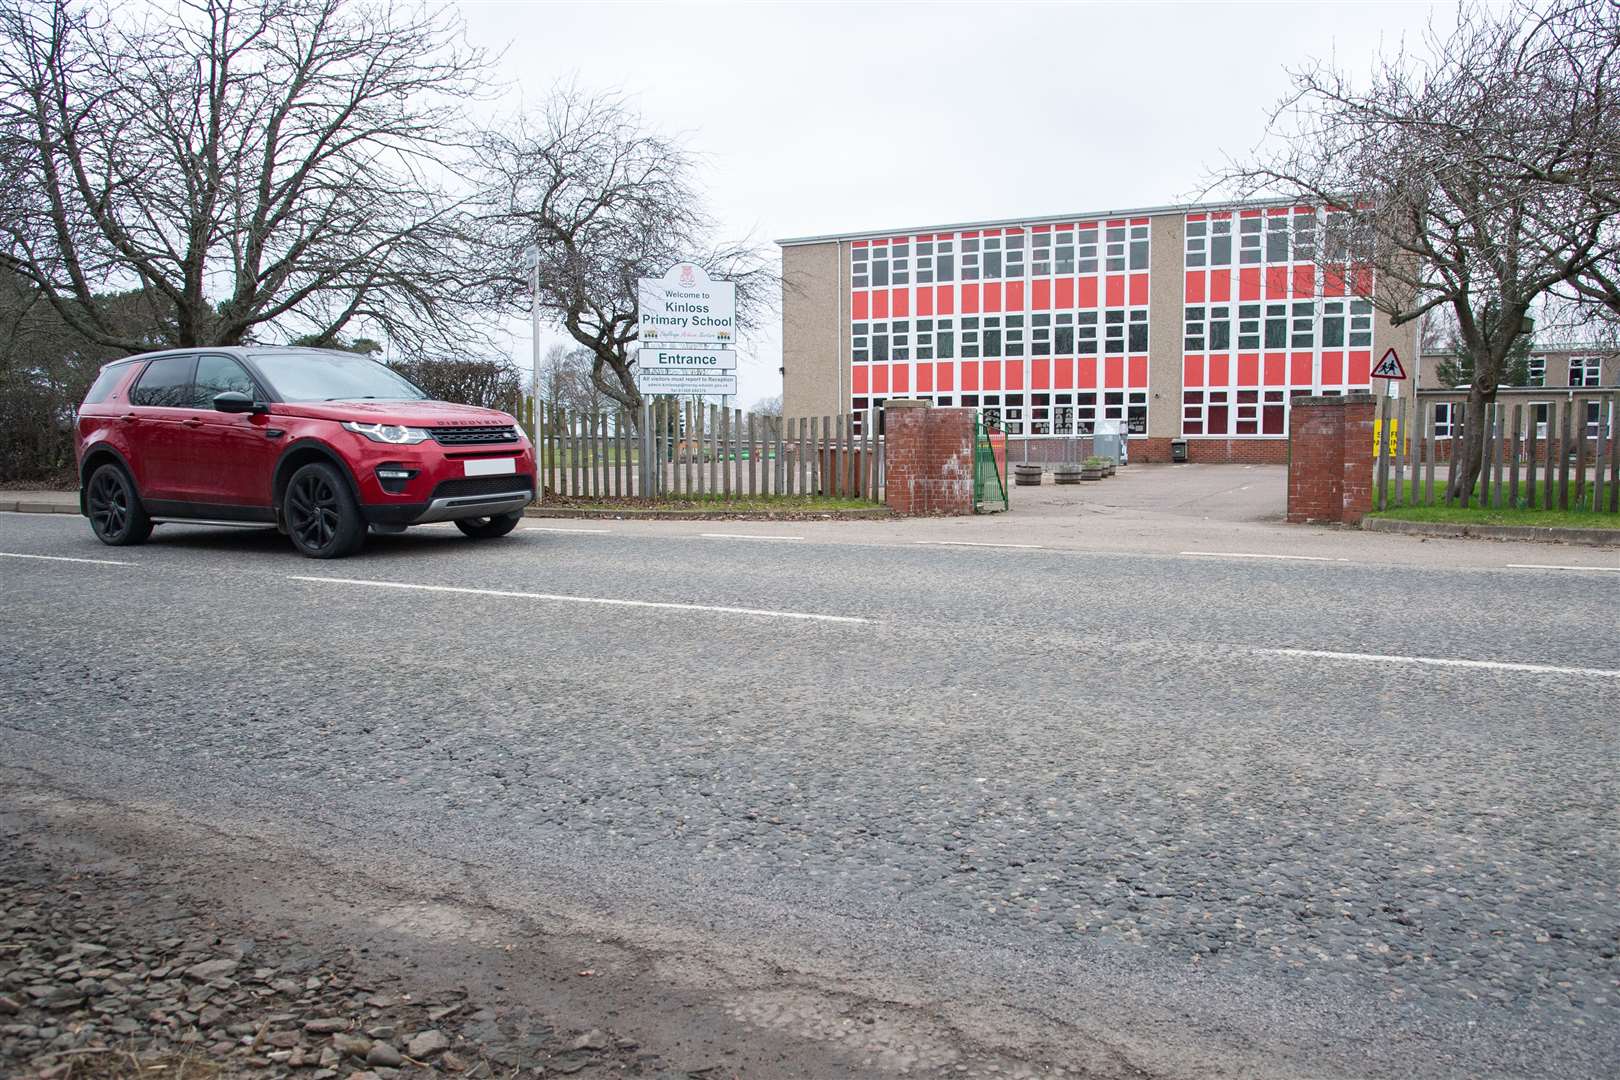 Kinloss Primary School from the B9089 road.